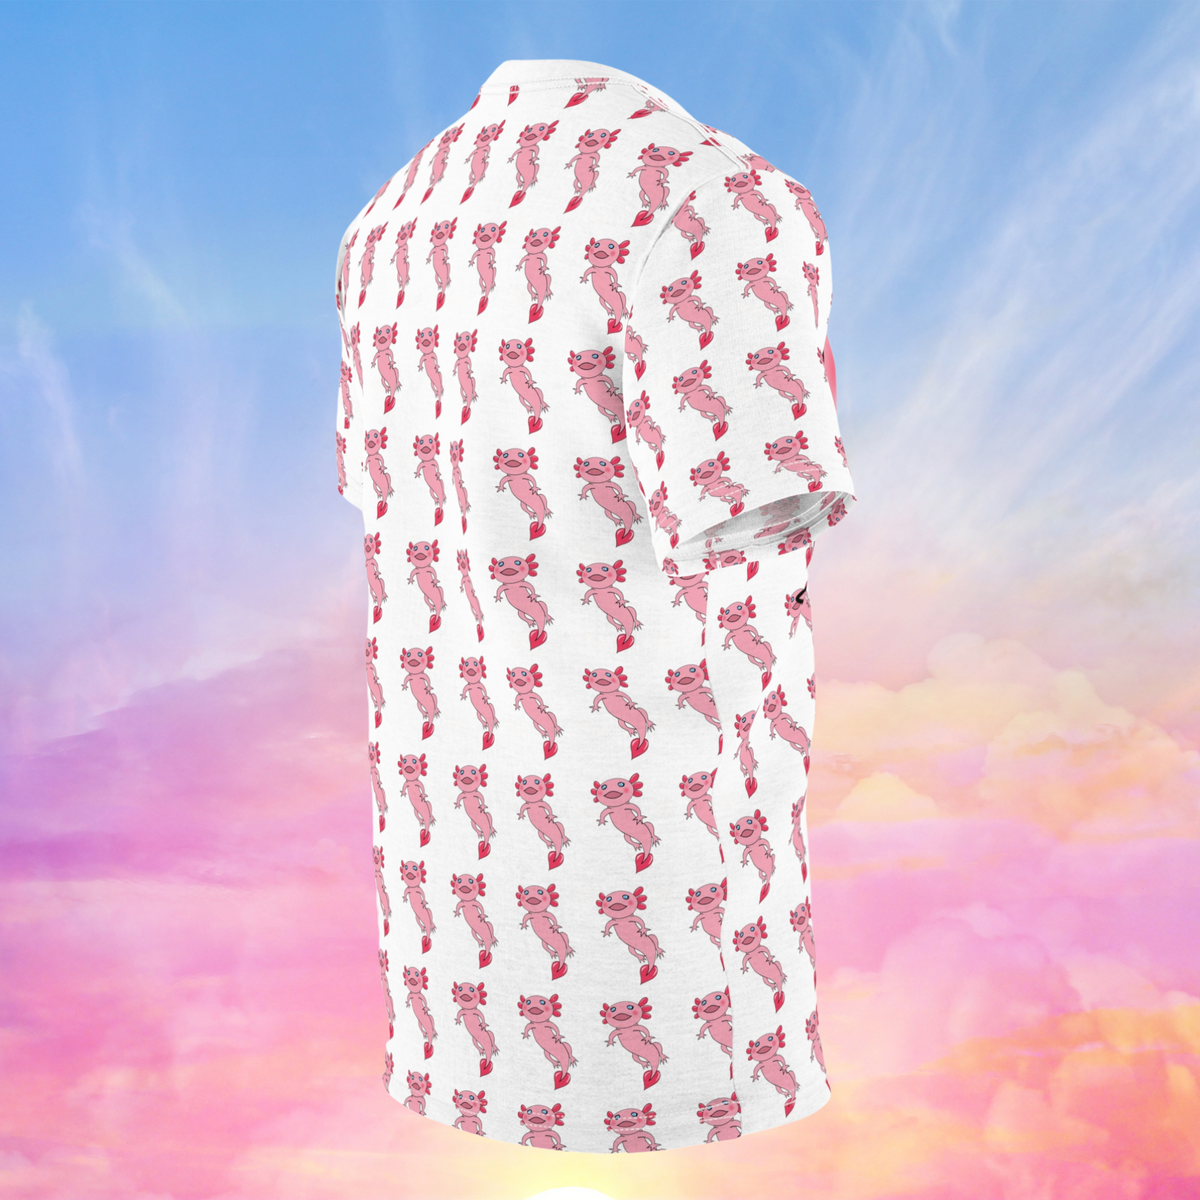 The image displays the side/back view of an all-over print t-shirt featuring a cute pink axolotl design. The background of the shirt is white with a repeating pattern of smaller pink axolotls throughout. Unlike the front, there is no large axolotl figure; instead, the smaller pink axolotls form a consistent pattern across the entire back of the shirt. 